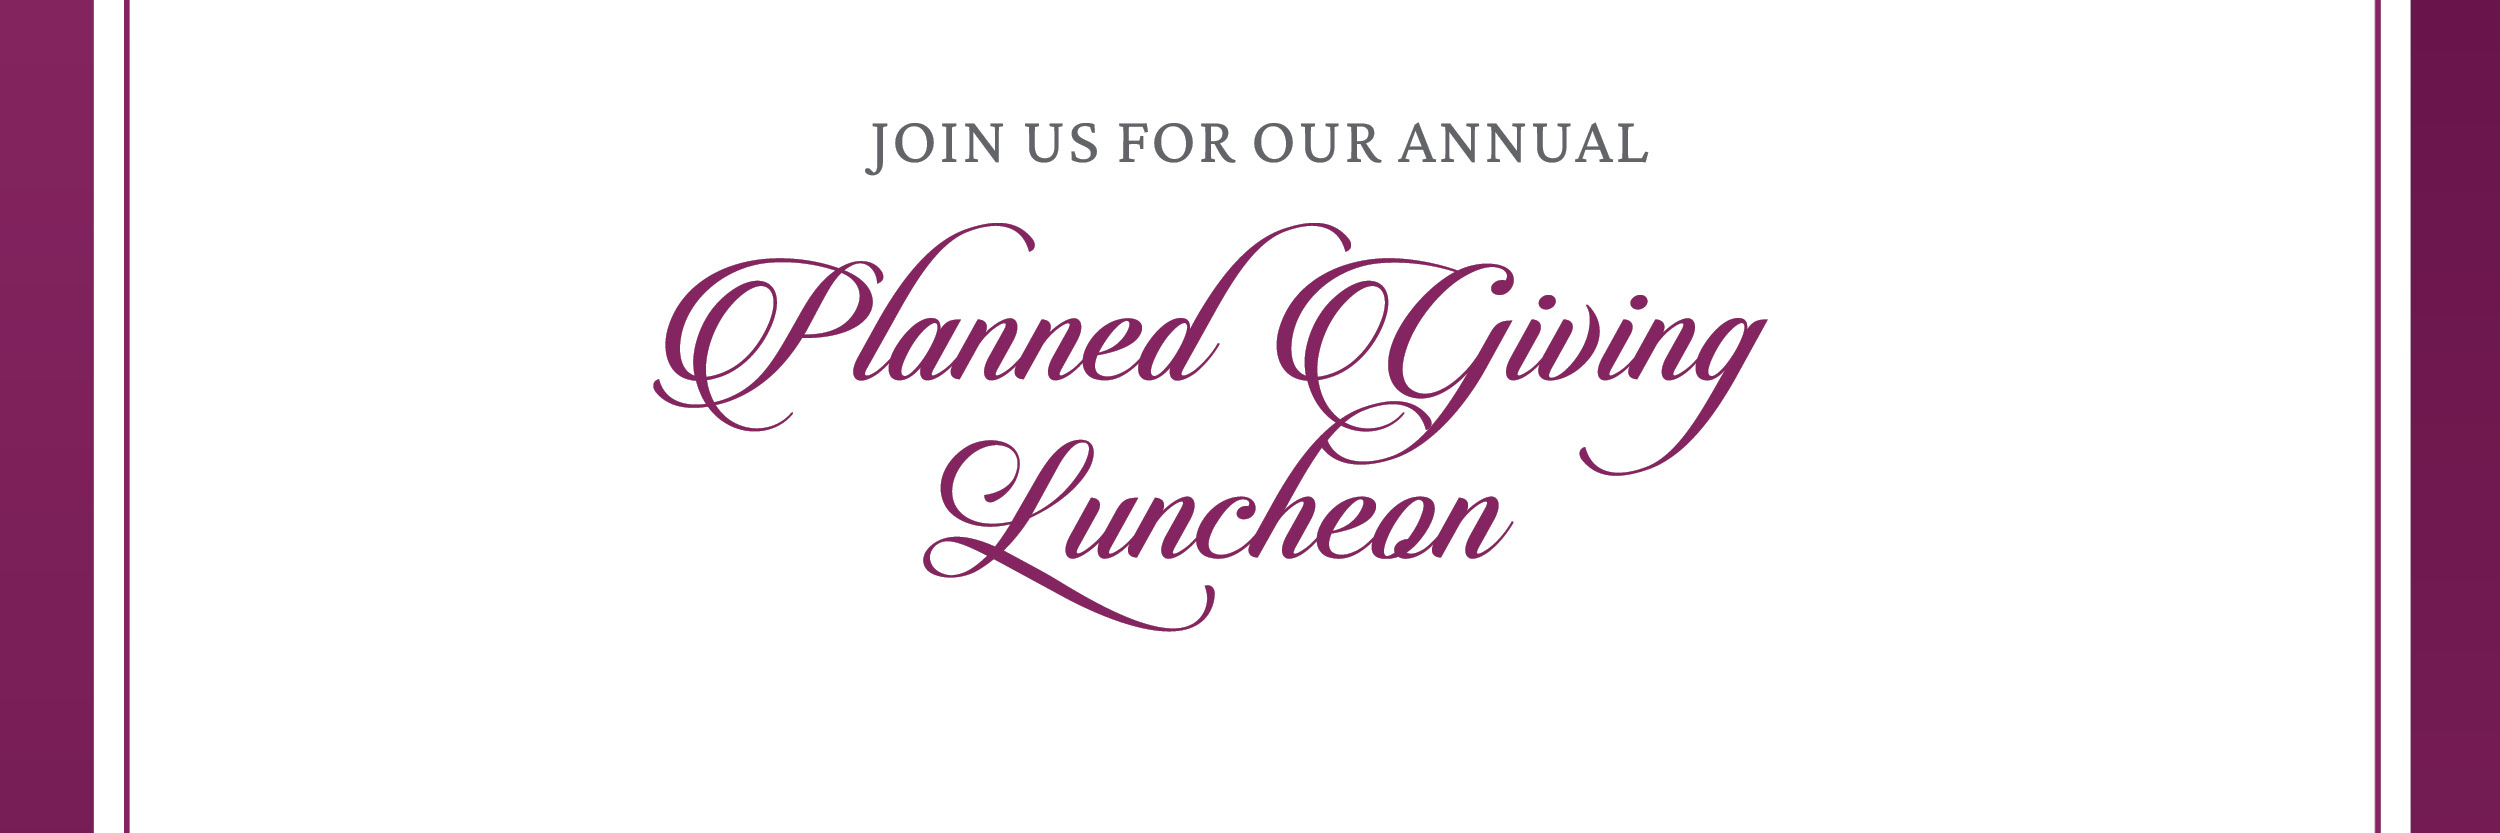 Planned Giving Luncheon